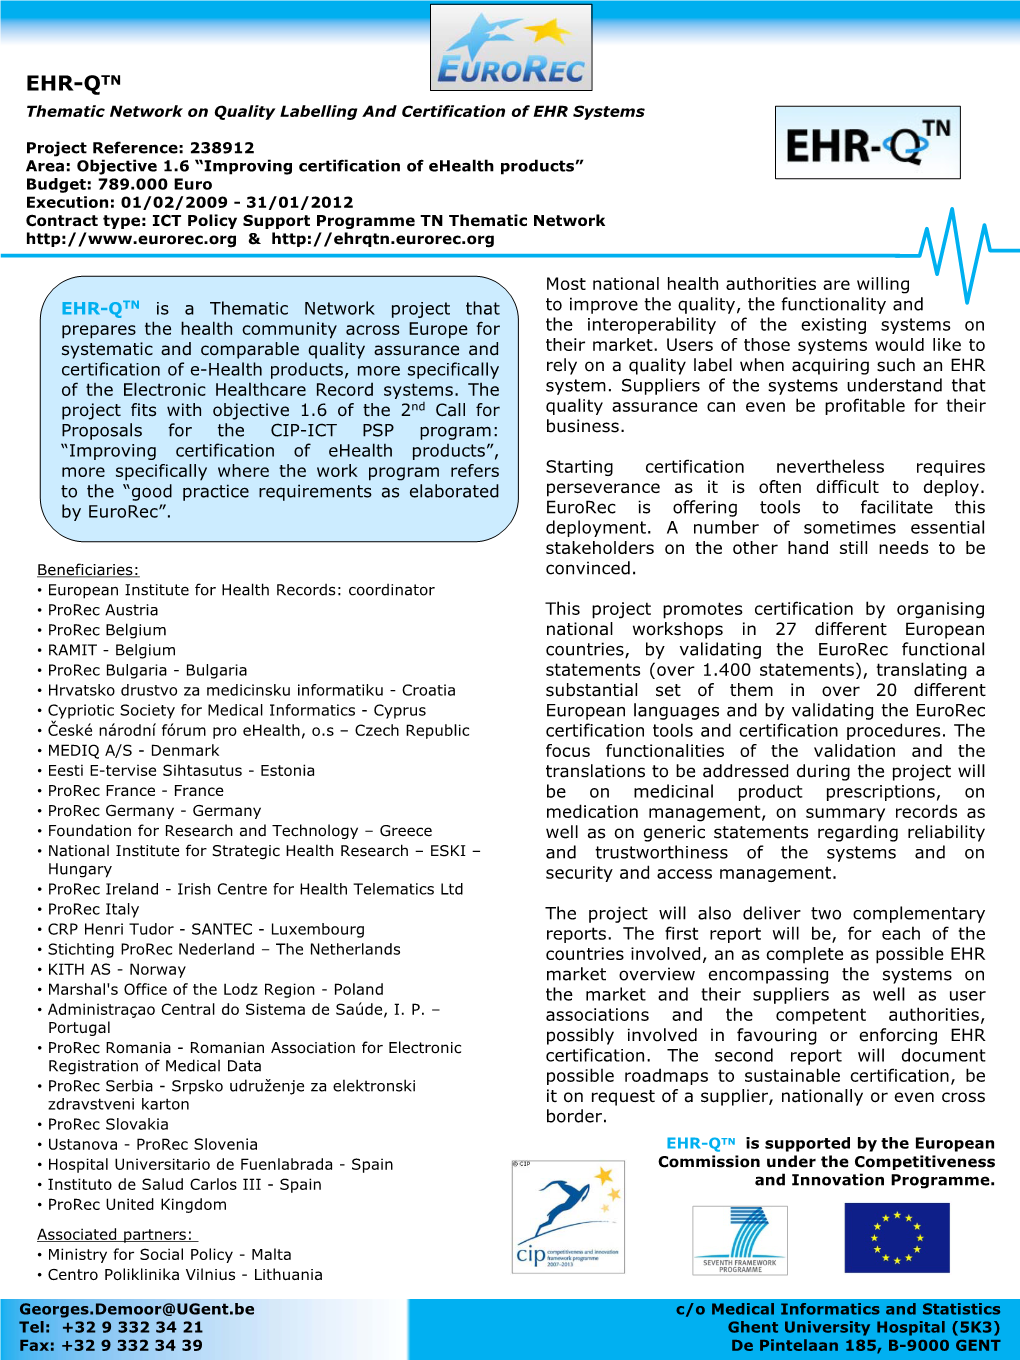 EHR-QTN Thematic Network on Quality Labelling and Certification of EHR Systems